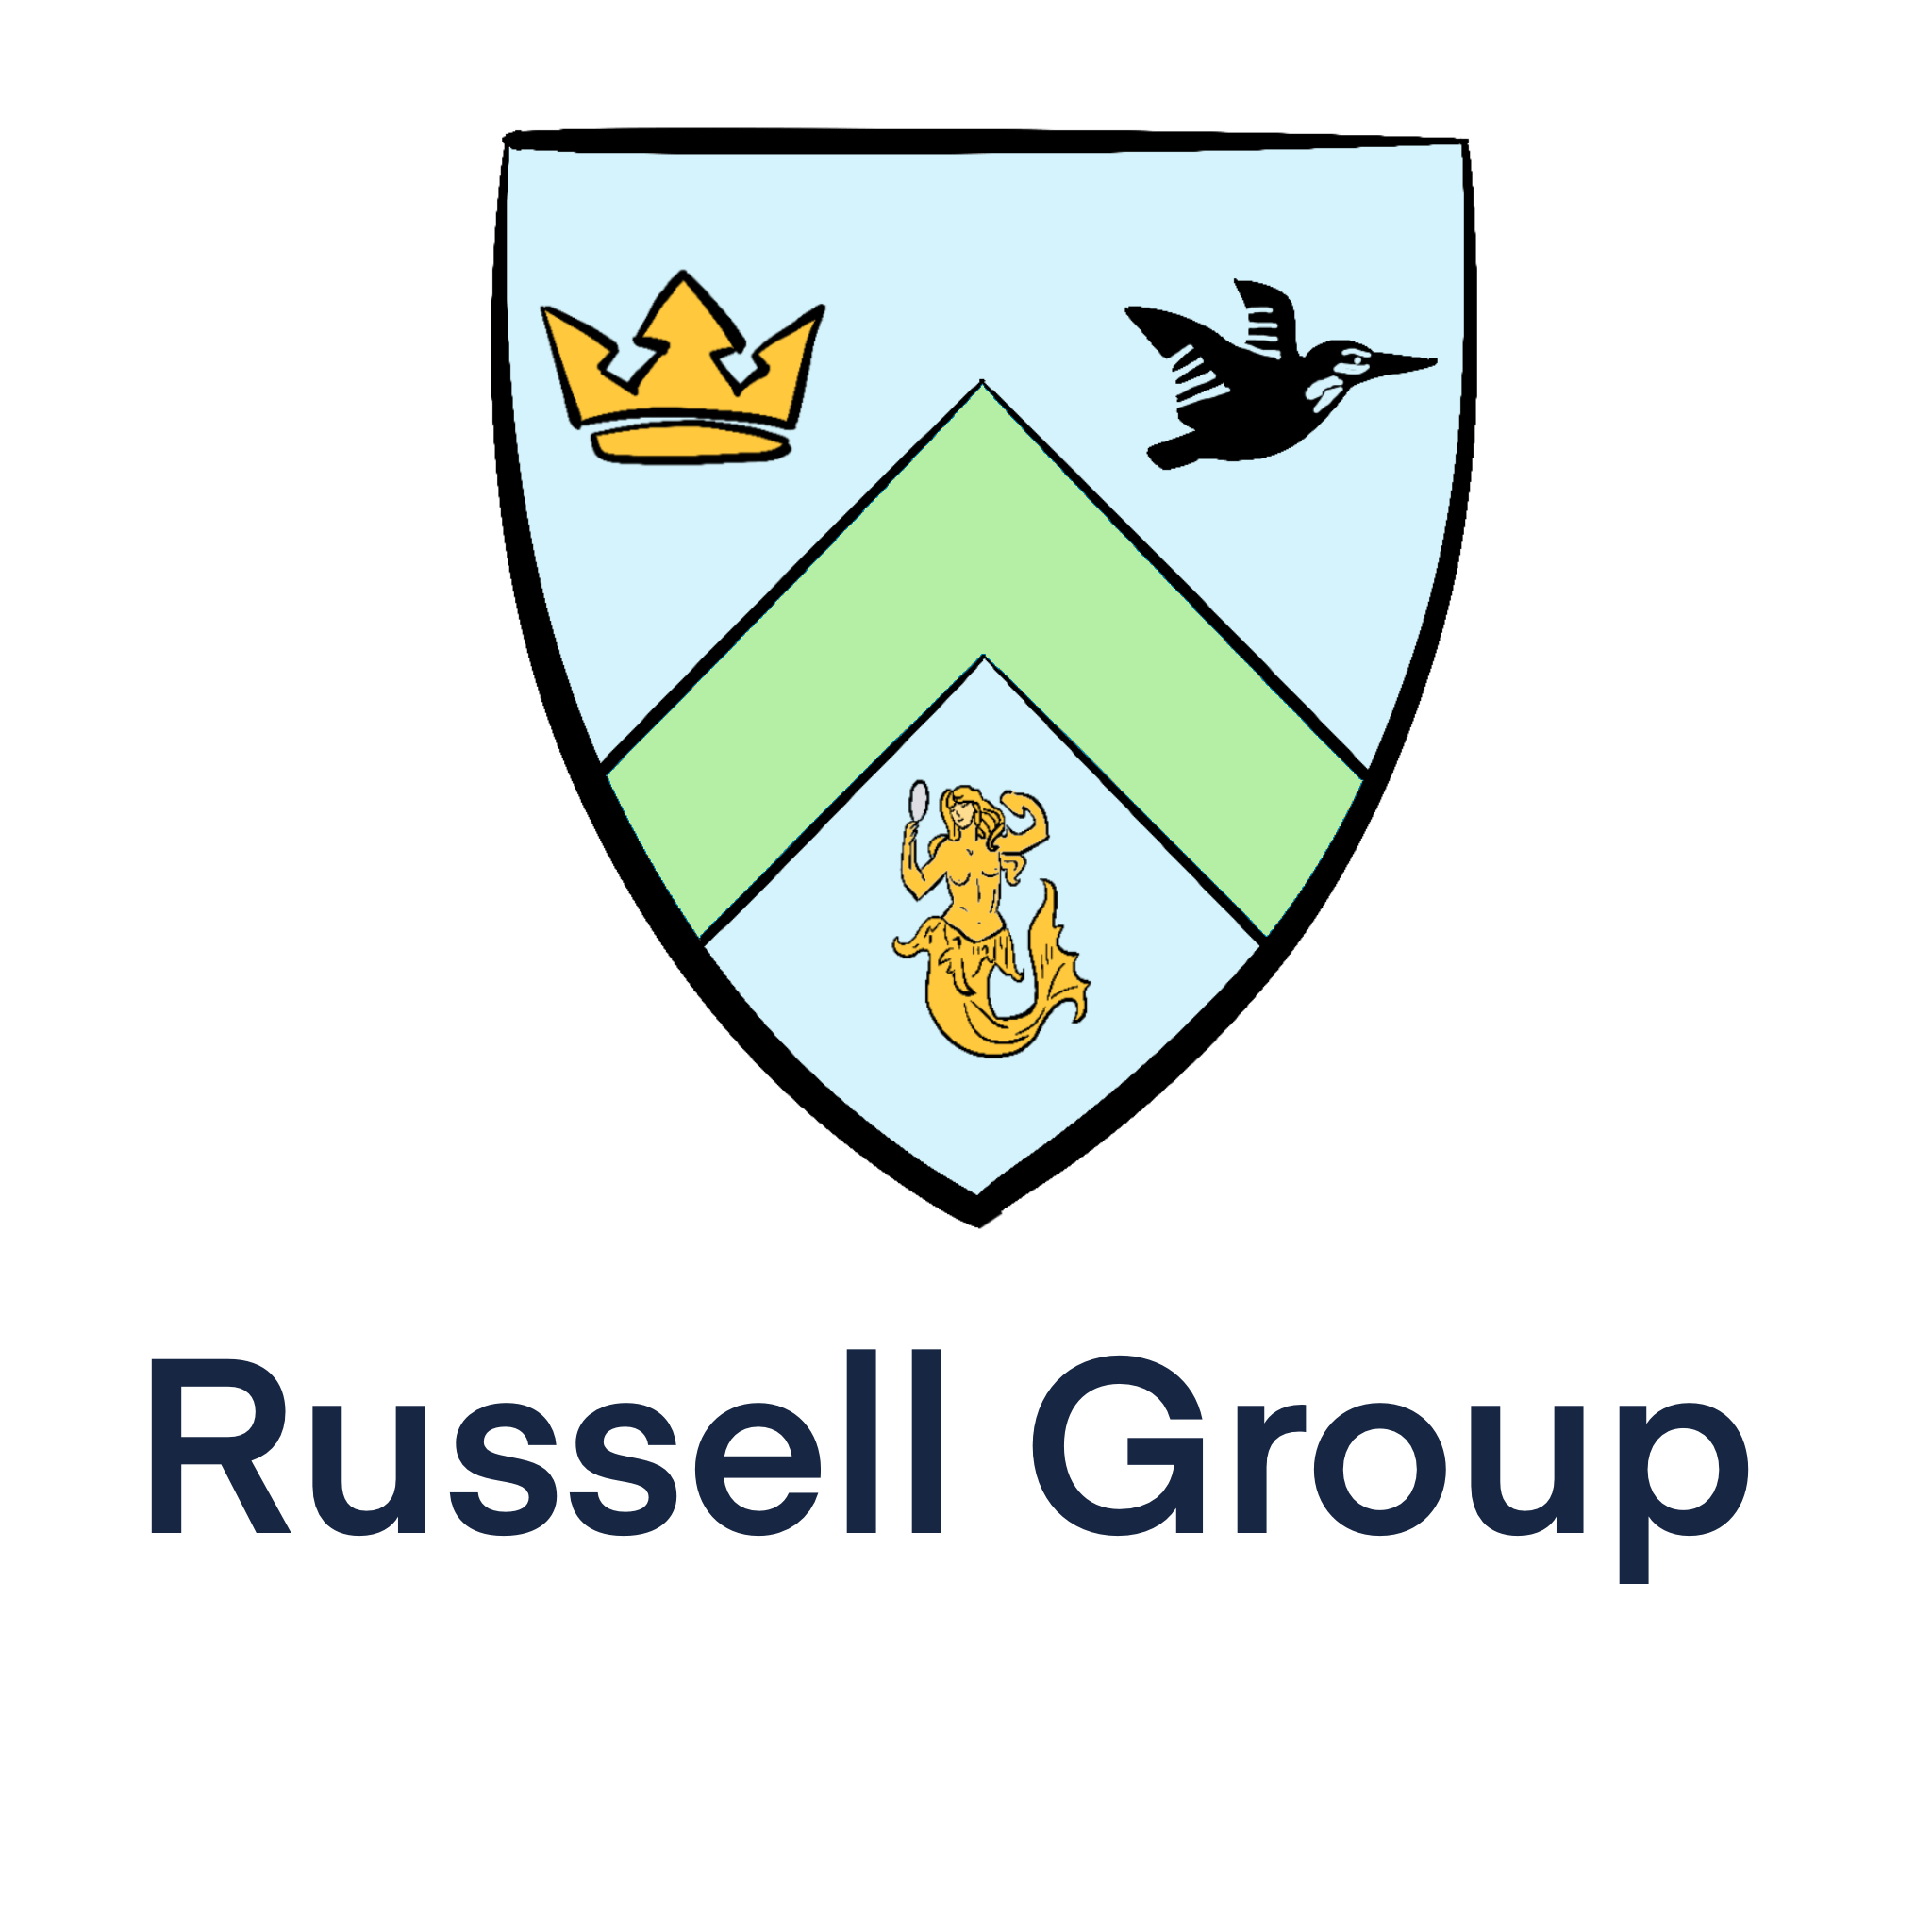 Sam holds a degree from a Russell Group University